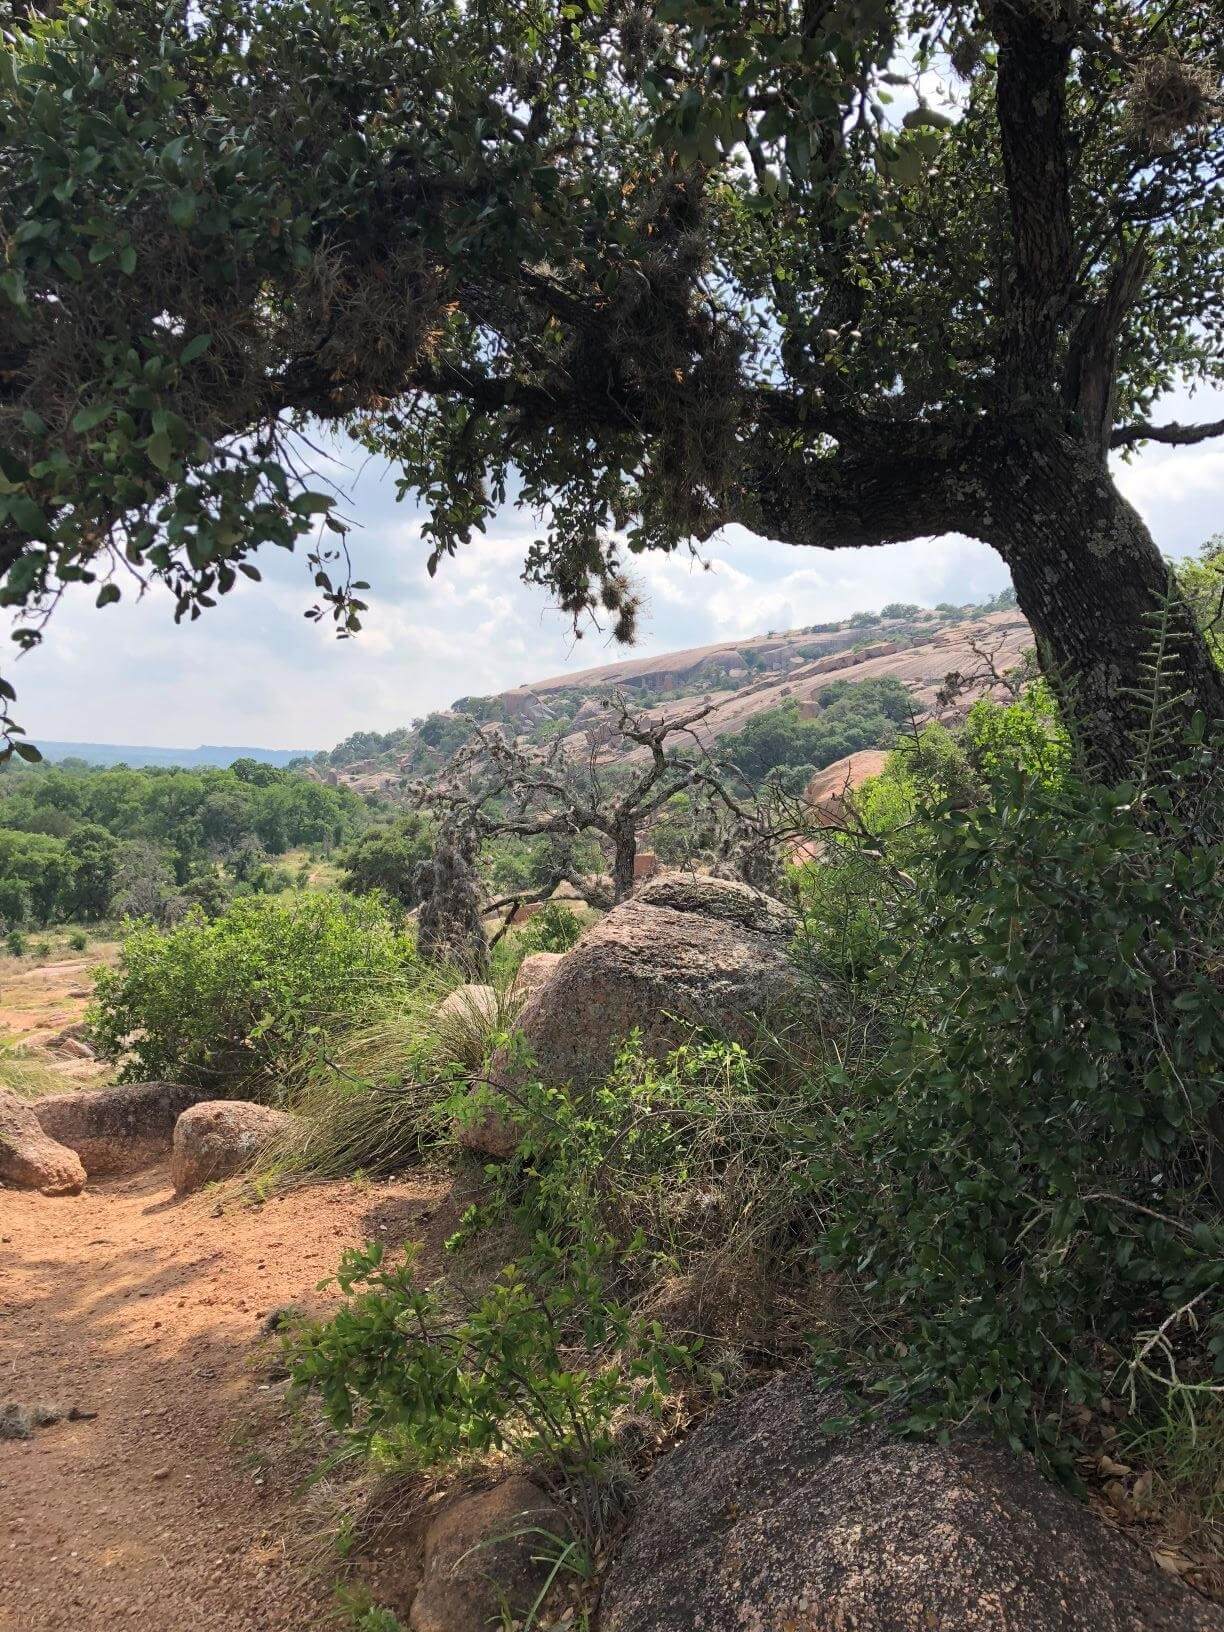 Texas landscape with trees and rock at Enchanted Rock State Natural Area